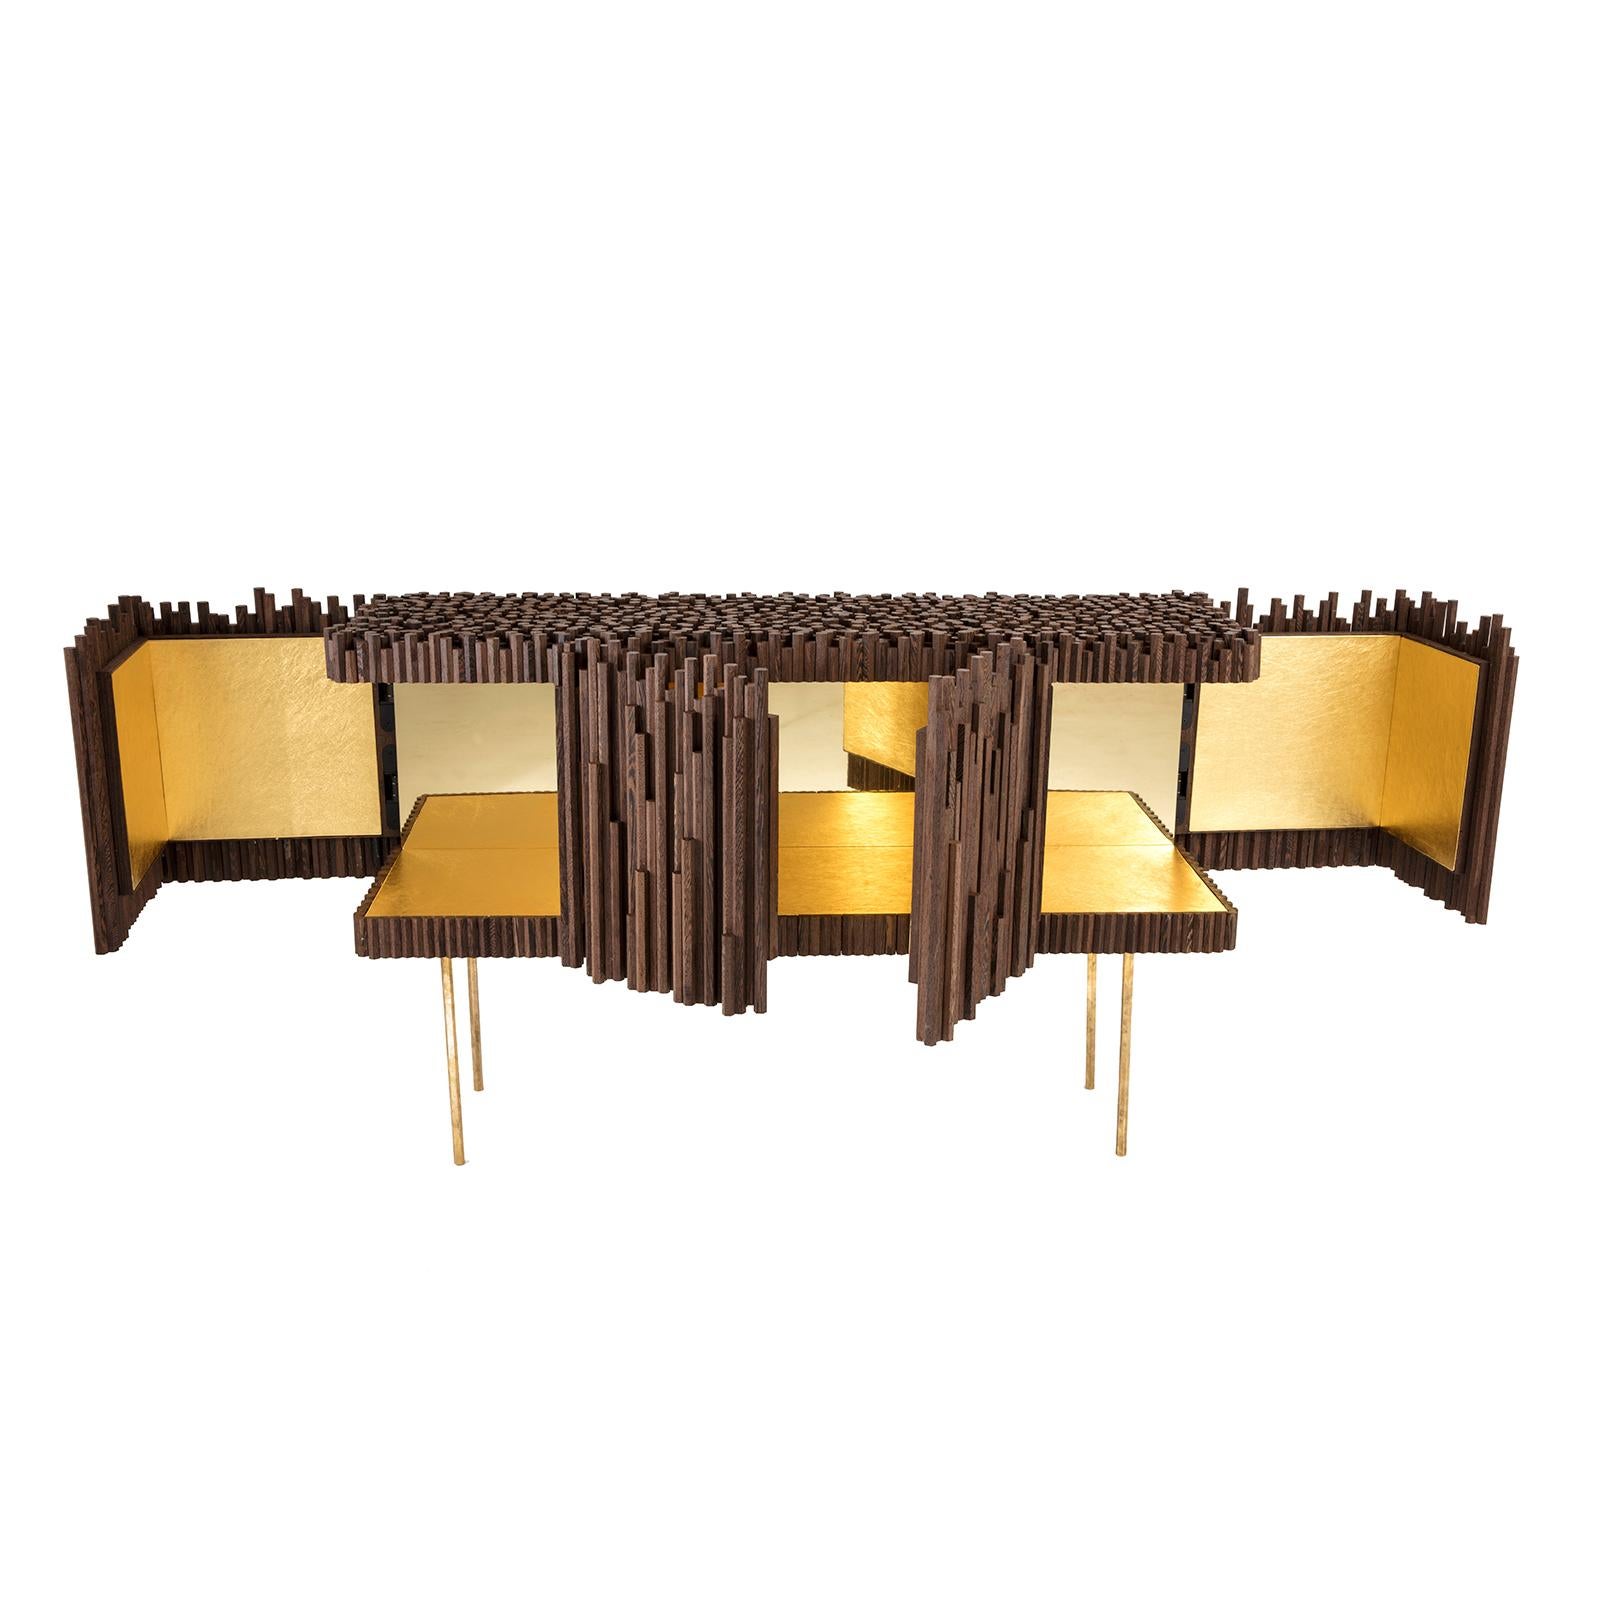 Rossana Orlandi Rochester Sideboard in Wenge by Francesco Messina for Cypraea In New Condition For Sale In Milan, IT